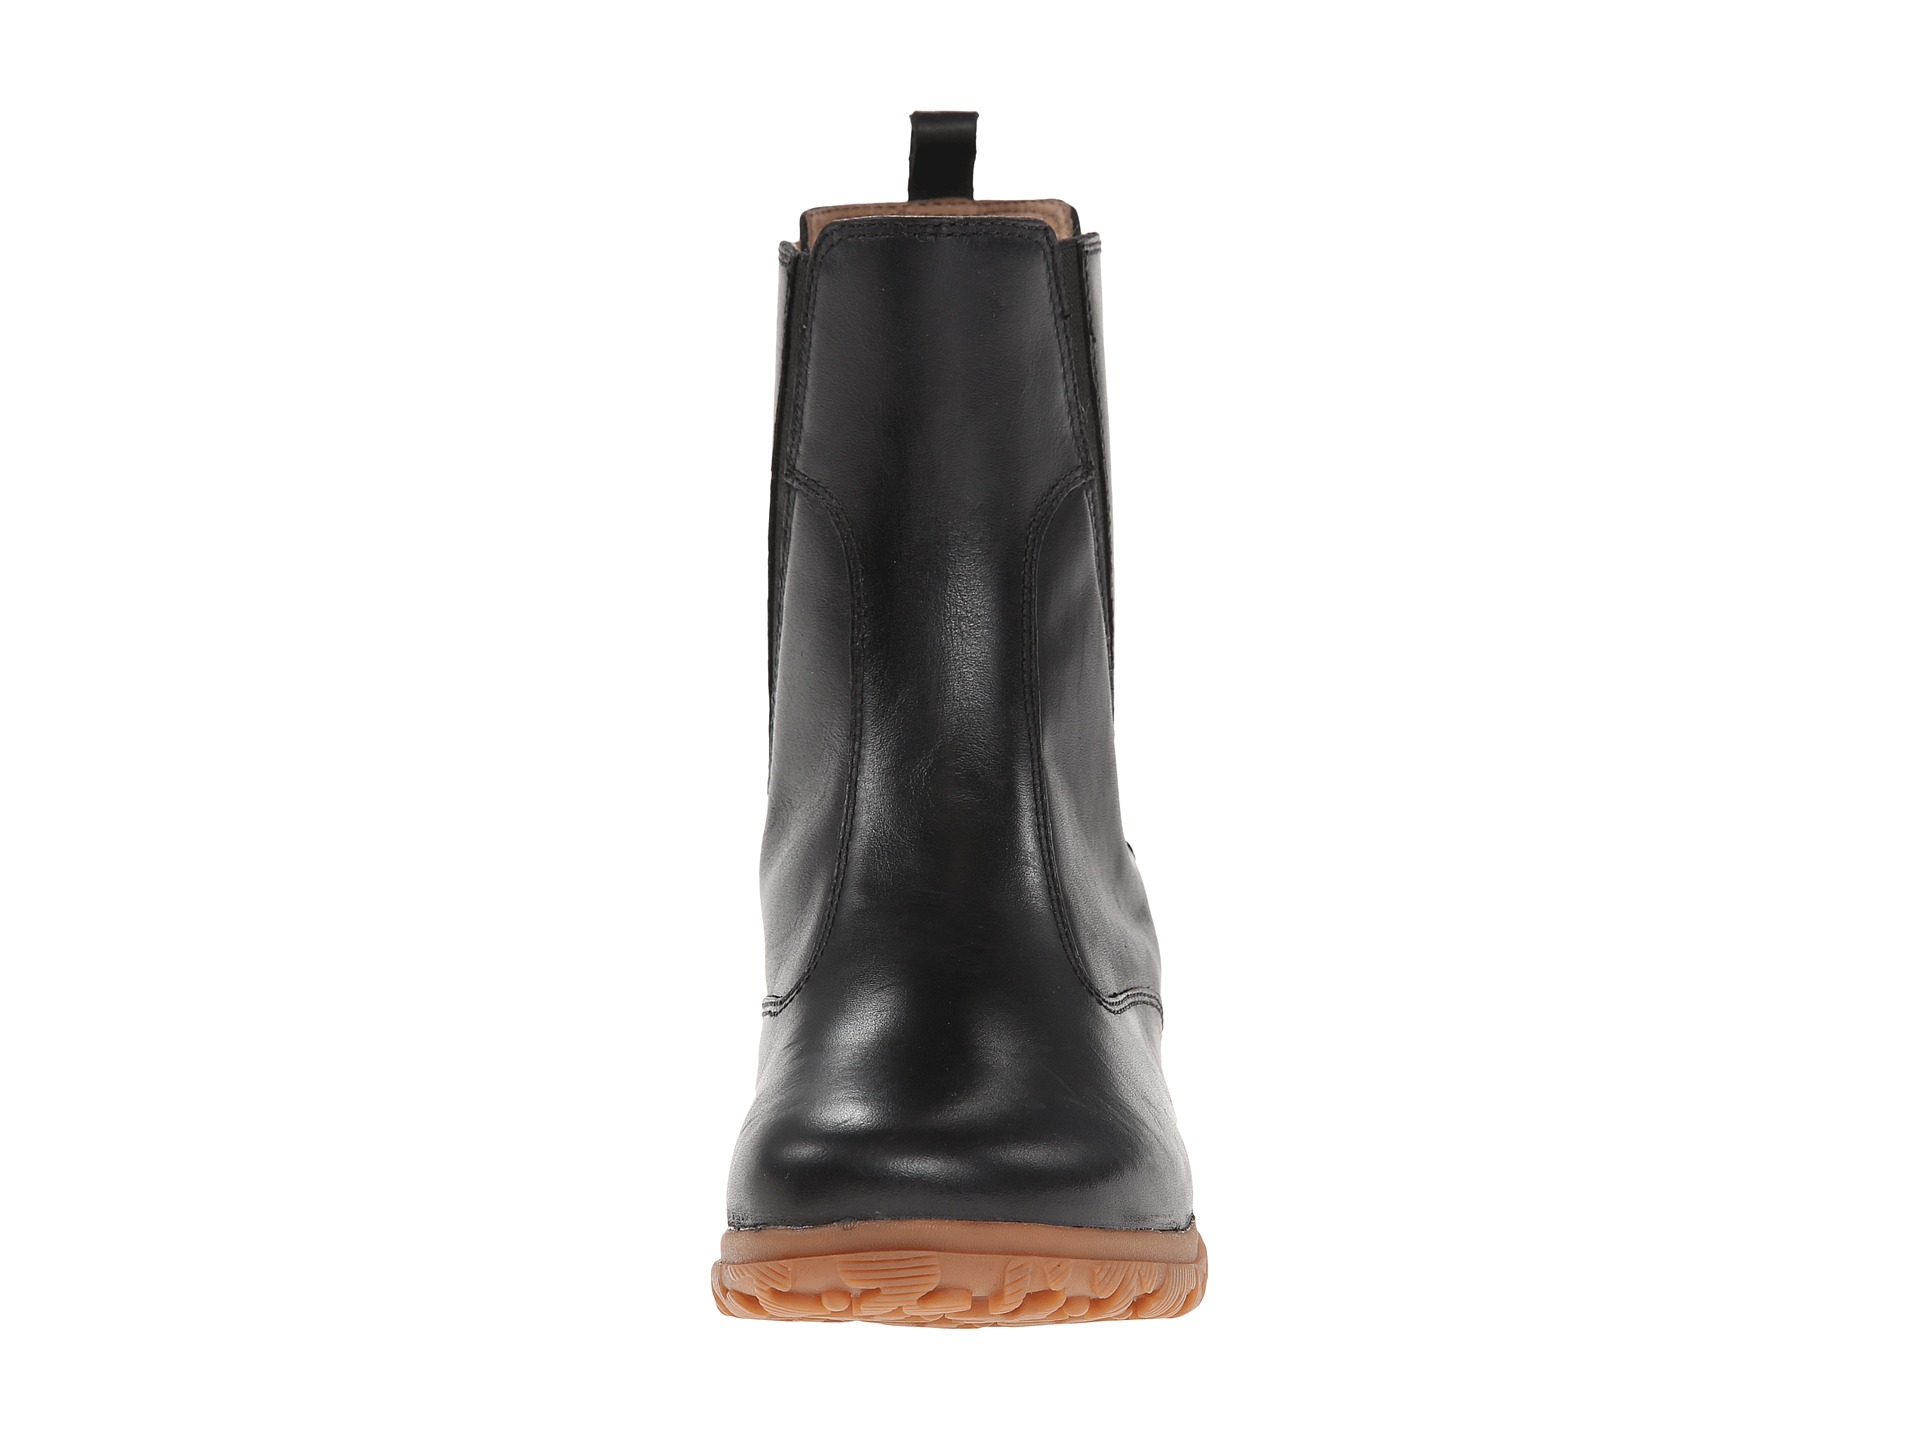 Bogs Pearl Slip On Boot Black | Shipped Free at Zappos